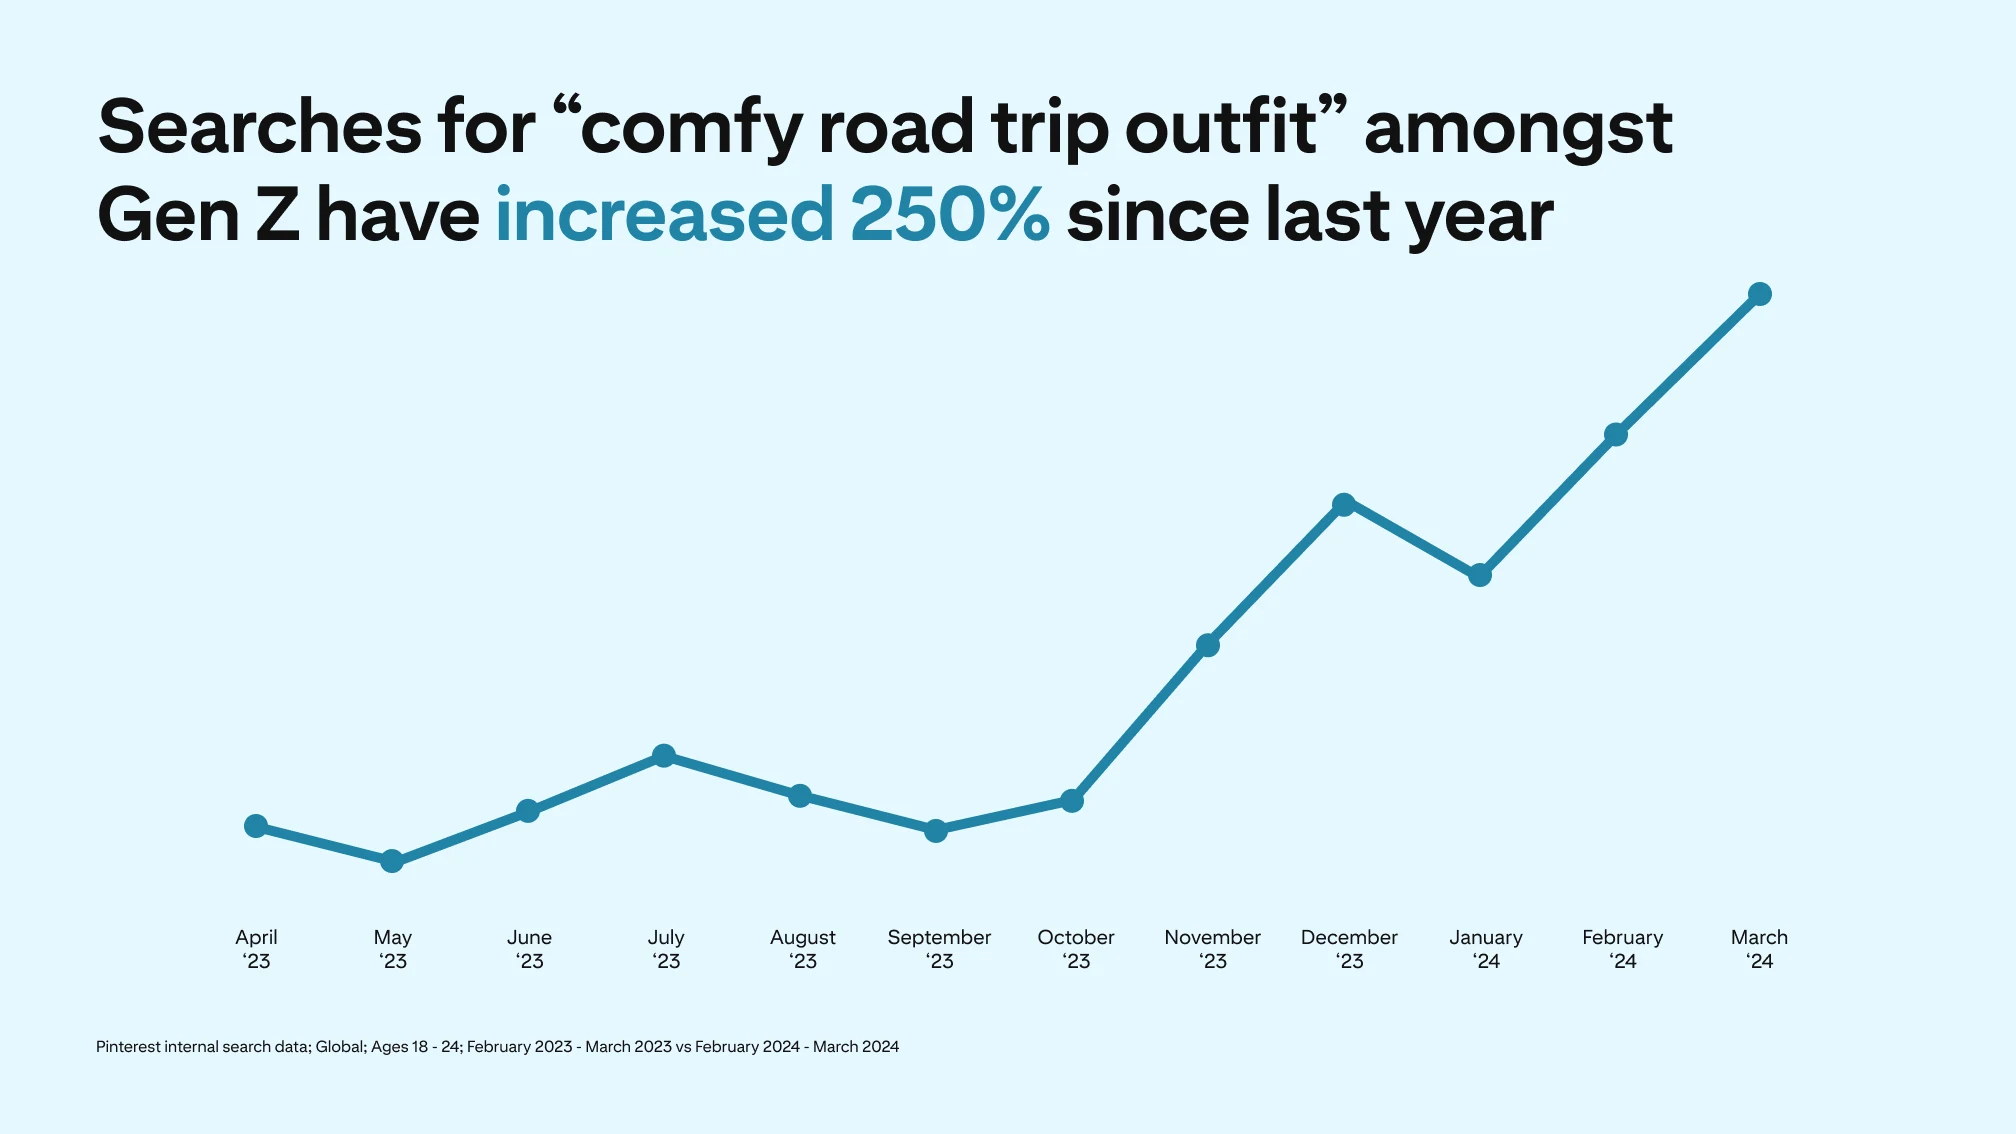 A line graph depicts a 250% increase in searches for "comfy road trip outfit" among Gen Z